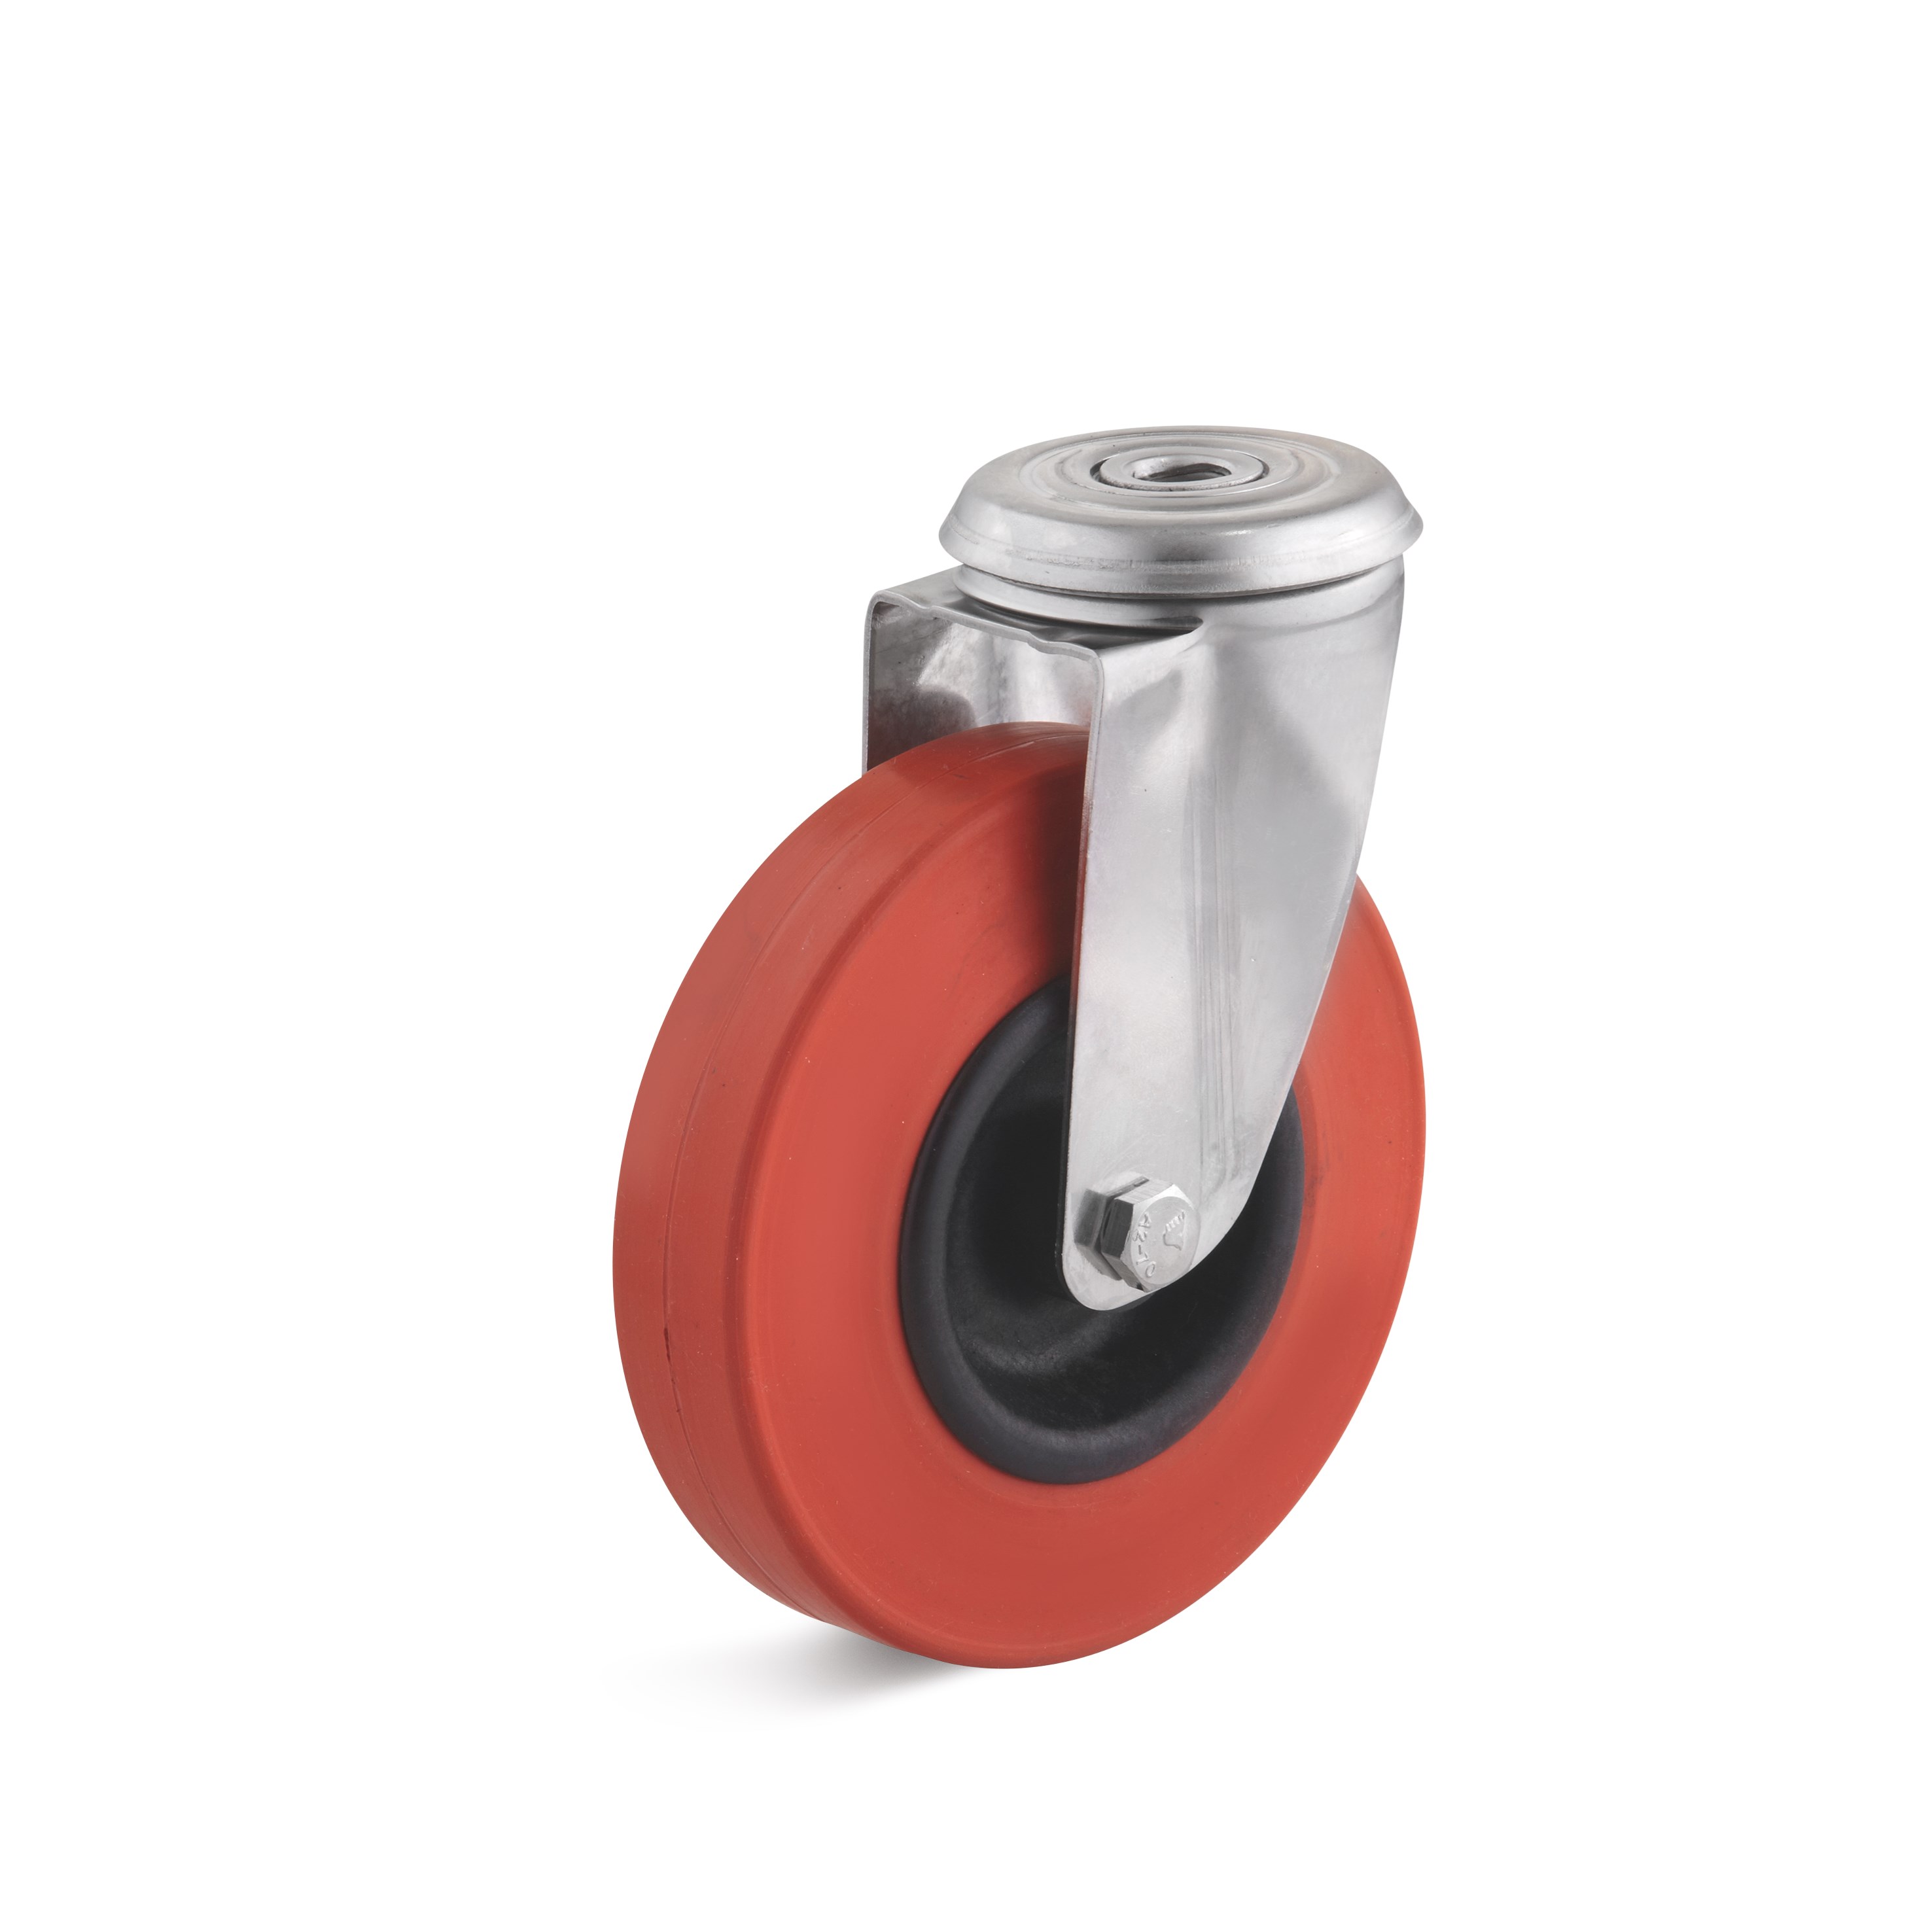 Stainless steel swivel castor with back hole and heat-resistant wheel L-IV-HGK-100-G-1-ROT